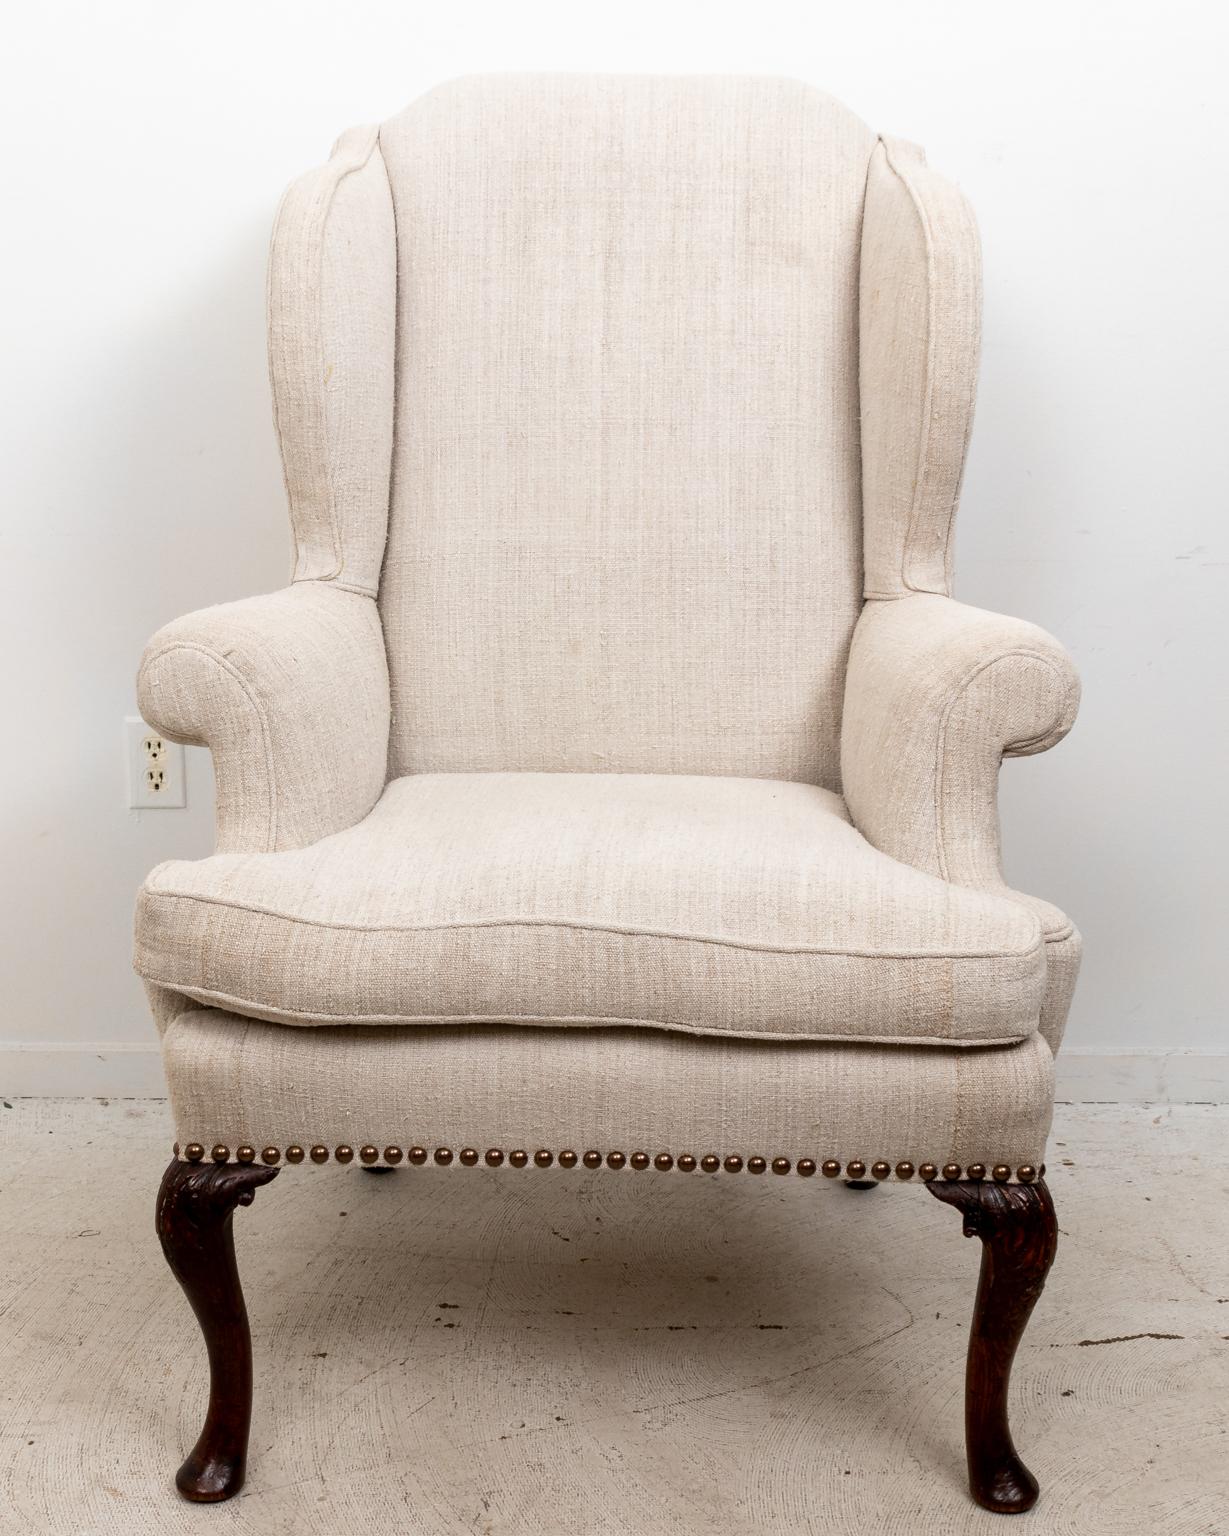 English style wing back armchair upholstered in a Belgian linen with cabriole legs, pad feet, and metal nail head trim. Please note of wear consistent with age.